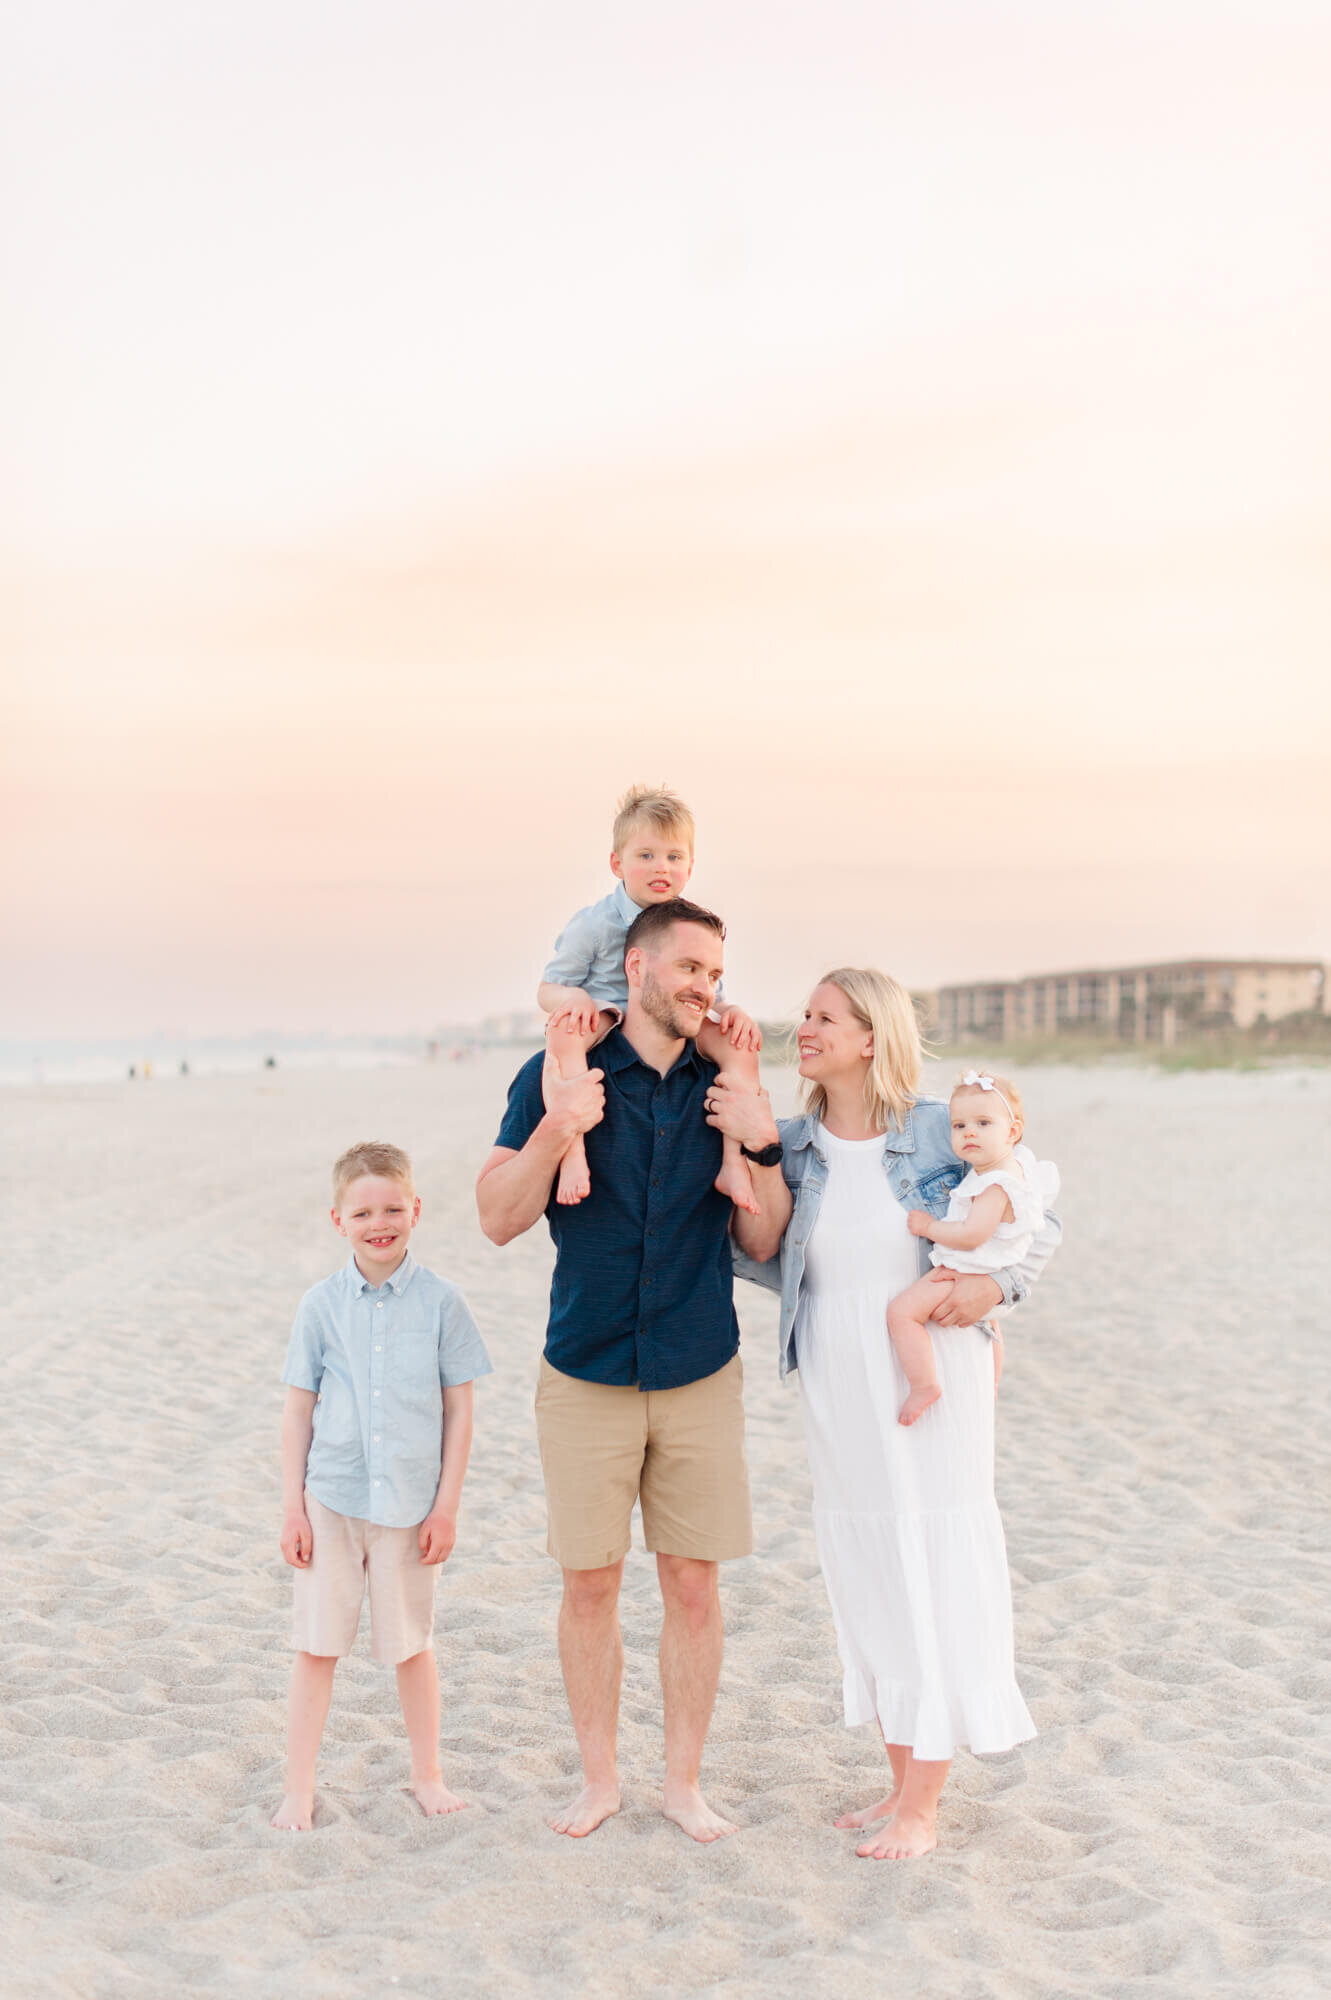 St Augustine family photographer captures family walking down the beach at golden hour